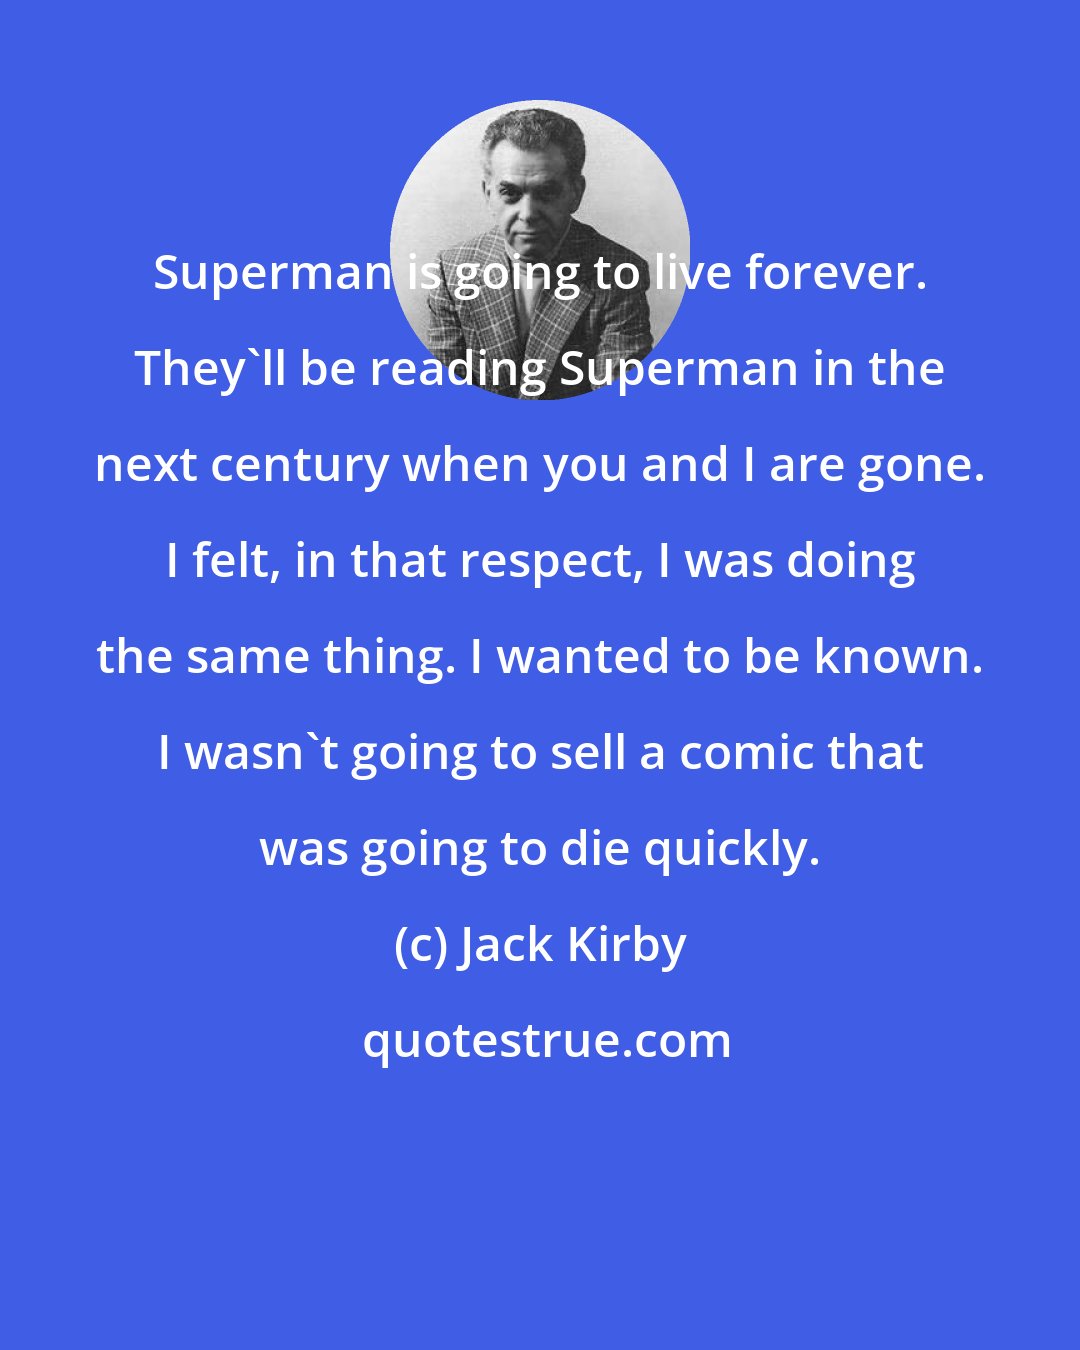 Jack Kirby: Superman is going to live forever. They'll be reading Superman in the next century when you and I are gone. I felt, in that respect, I was doing the same thing. I wanted to be known. I wasn't going to sell a comic that was going to die quickly.